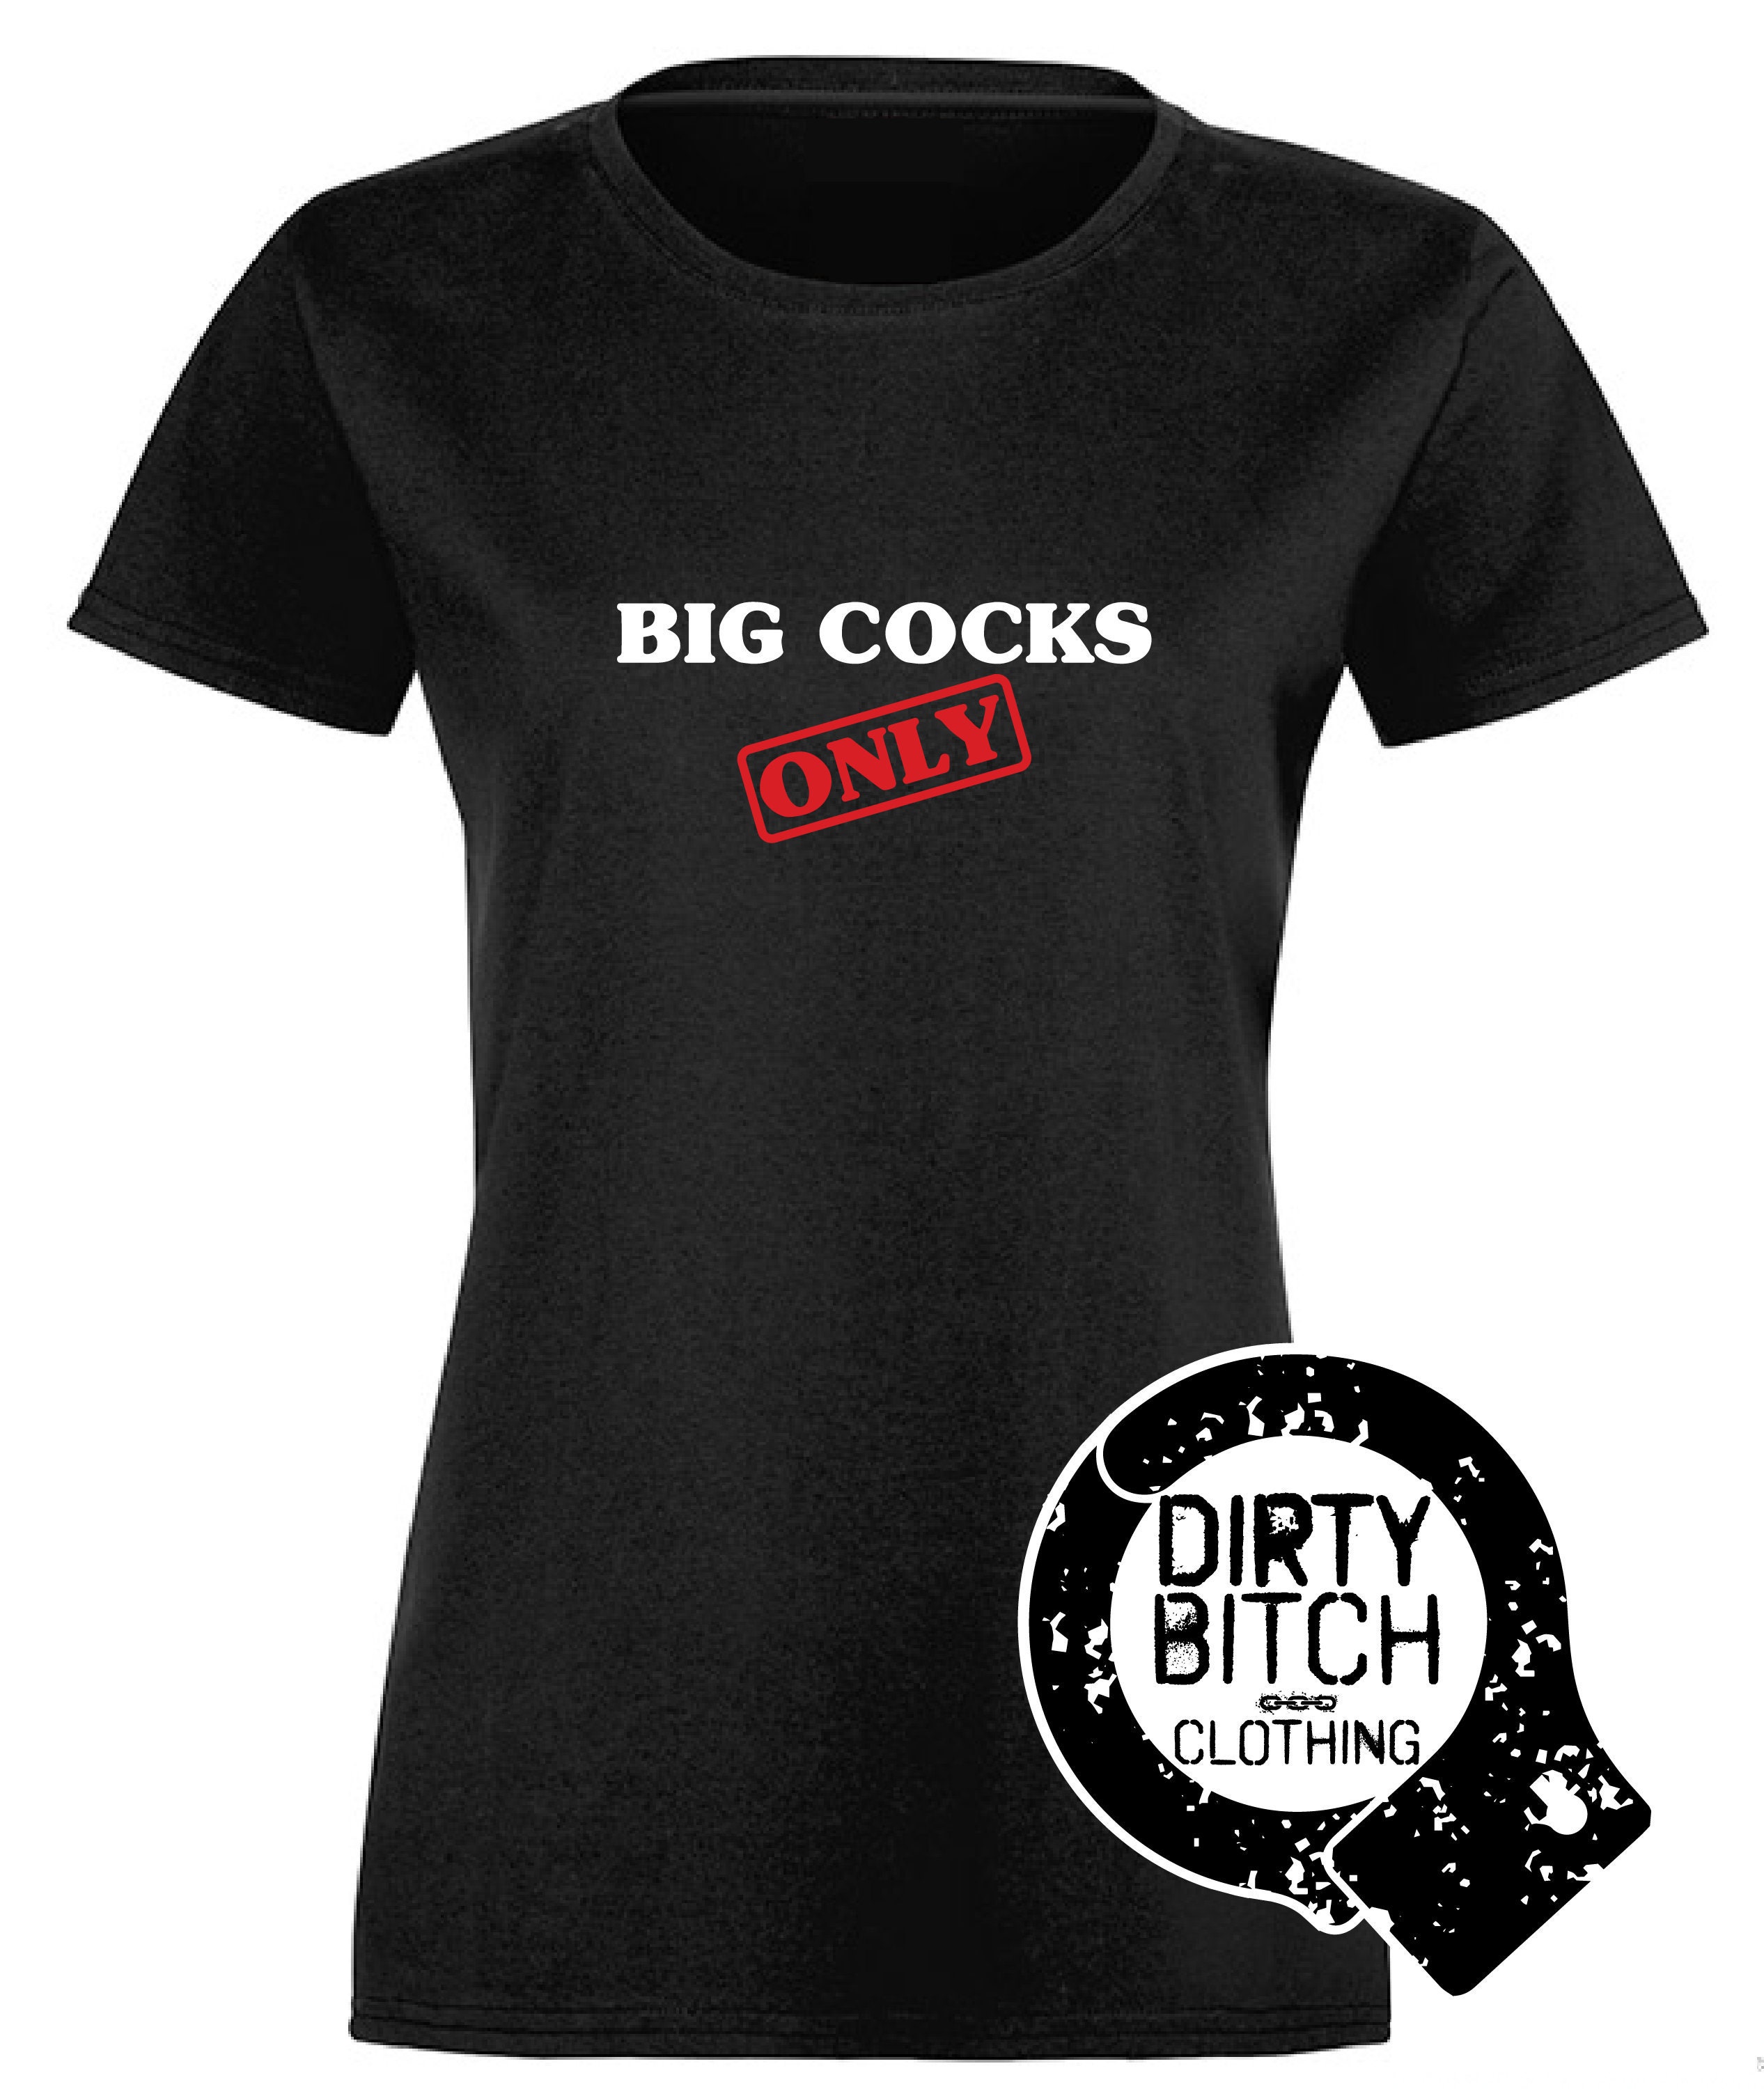 Big Cocks Only Adult T-shirt Clothing Boobs Hotwife